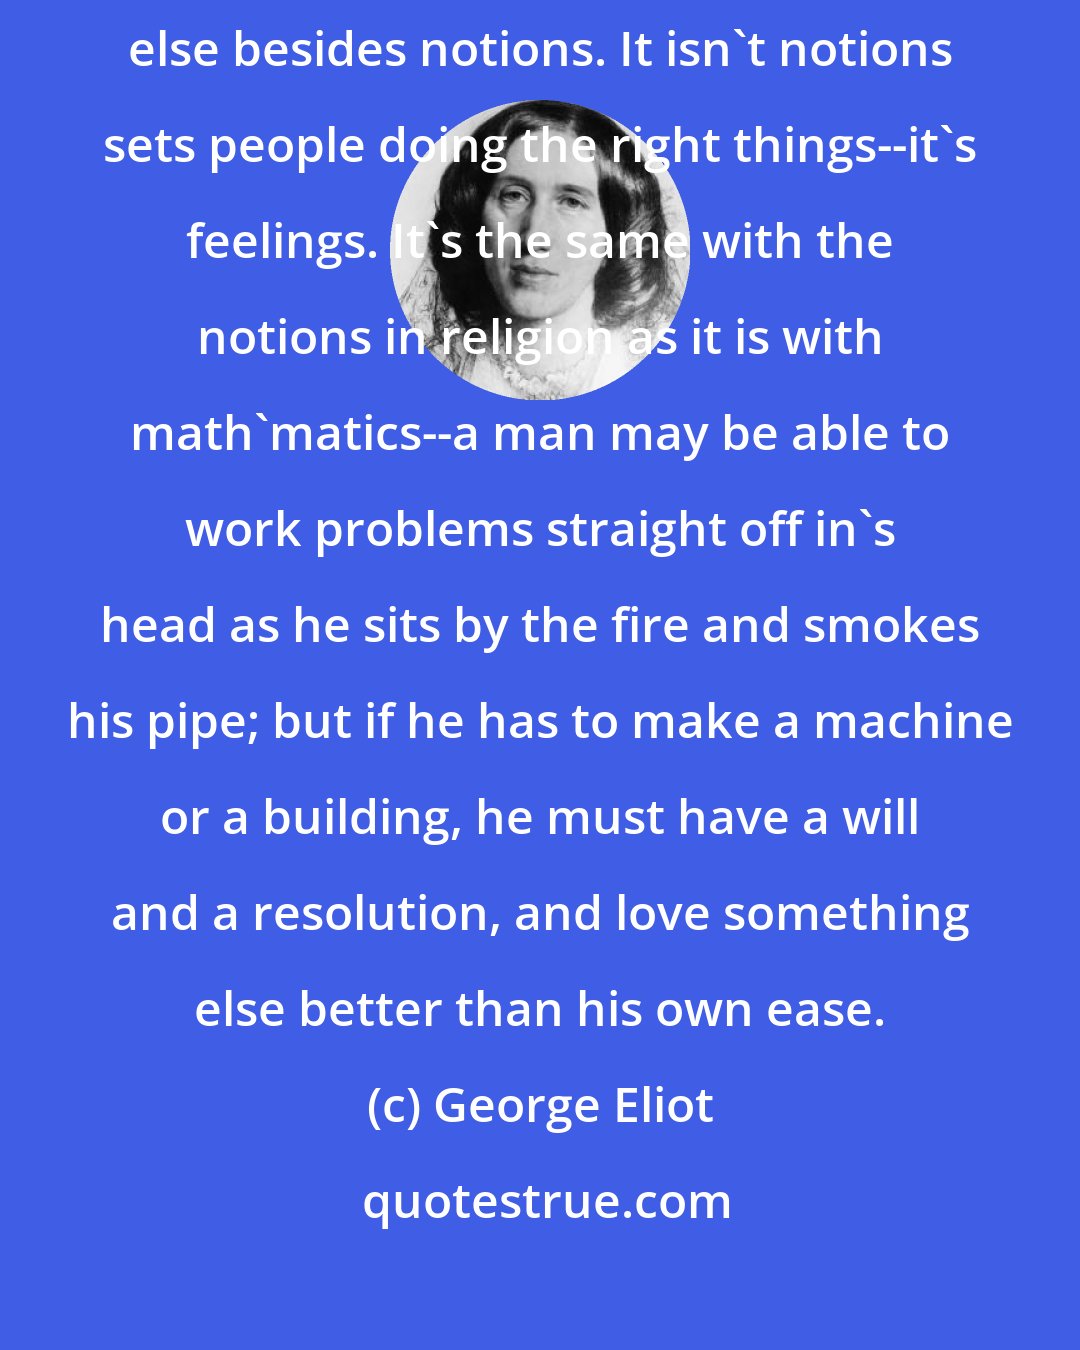 George Eliot: I've seen pretty clear, ever since I was a young un, as religion's something else besides notions. It isn't notions sets people doing the right things--it's feelings. It's the same with the notions in religion as it is with math'matics--a man may be able to work problems straight off in's head as he sits by the fire and smokes his pipe; but if he has to make a machine or a building, he must have a will and a resolution, and love something else better than his own ease.